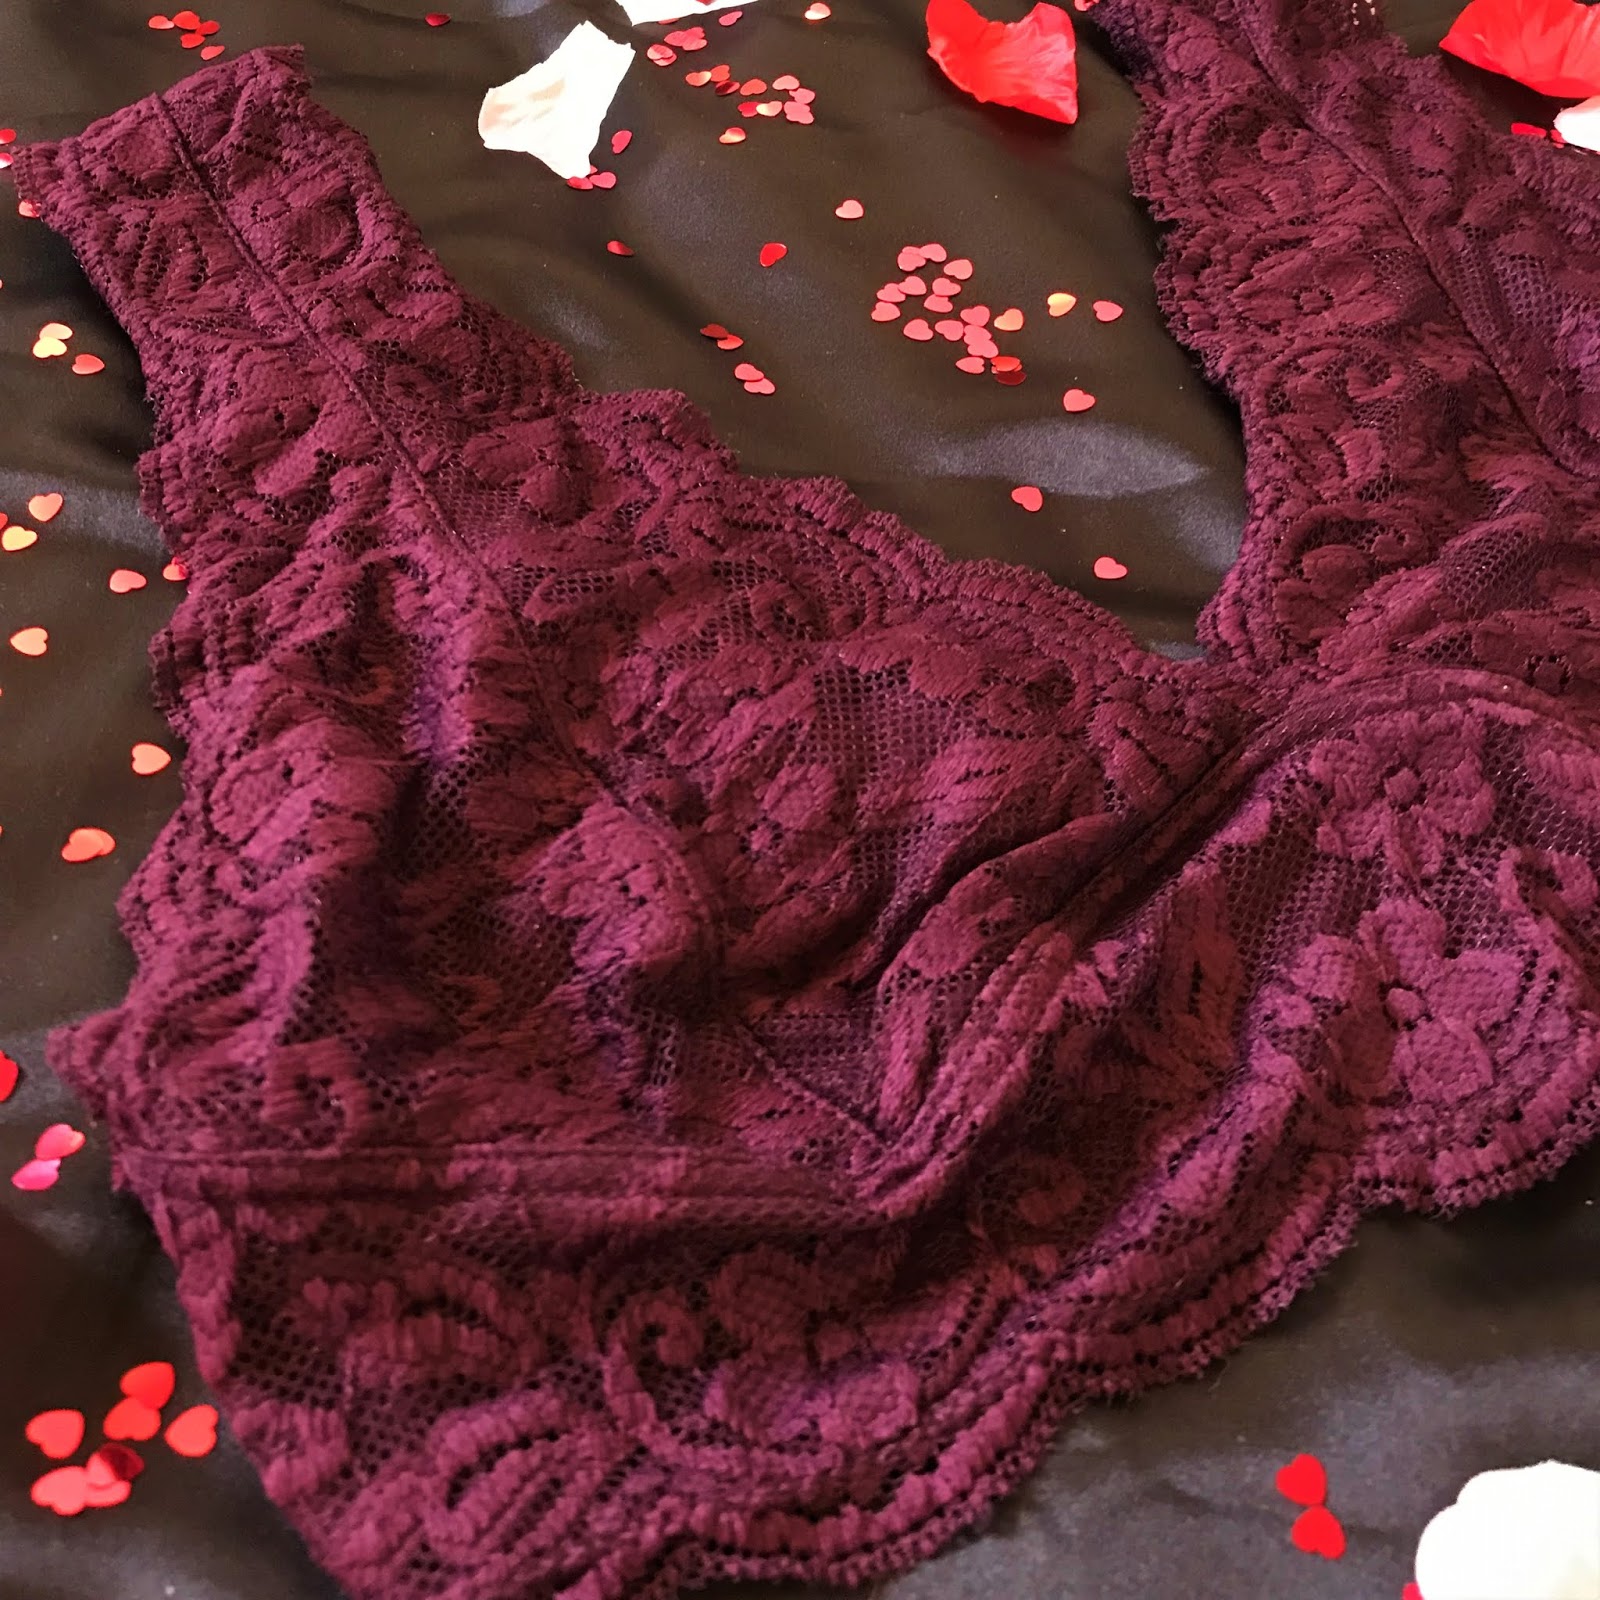 Affordable SHEIN Valentines Lingerie Haul ❤ - ○ Laura Thornberry